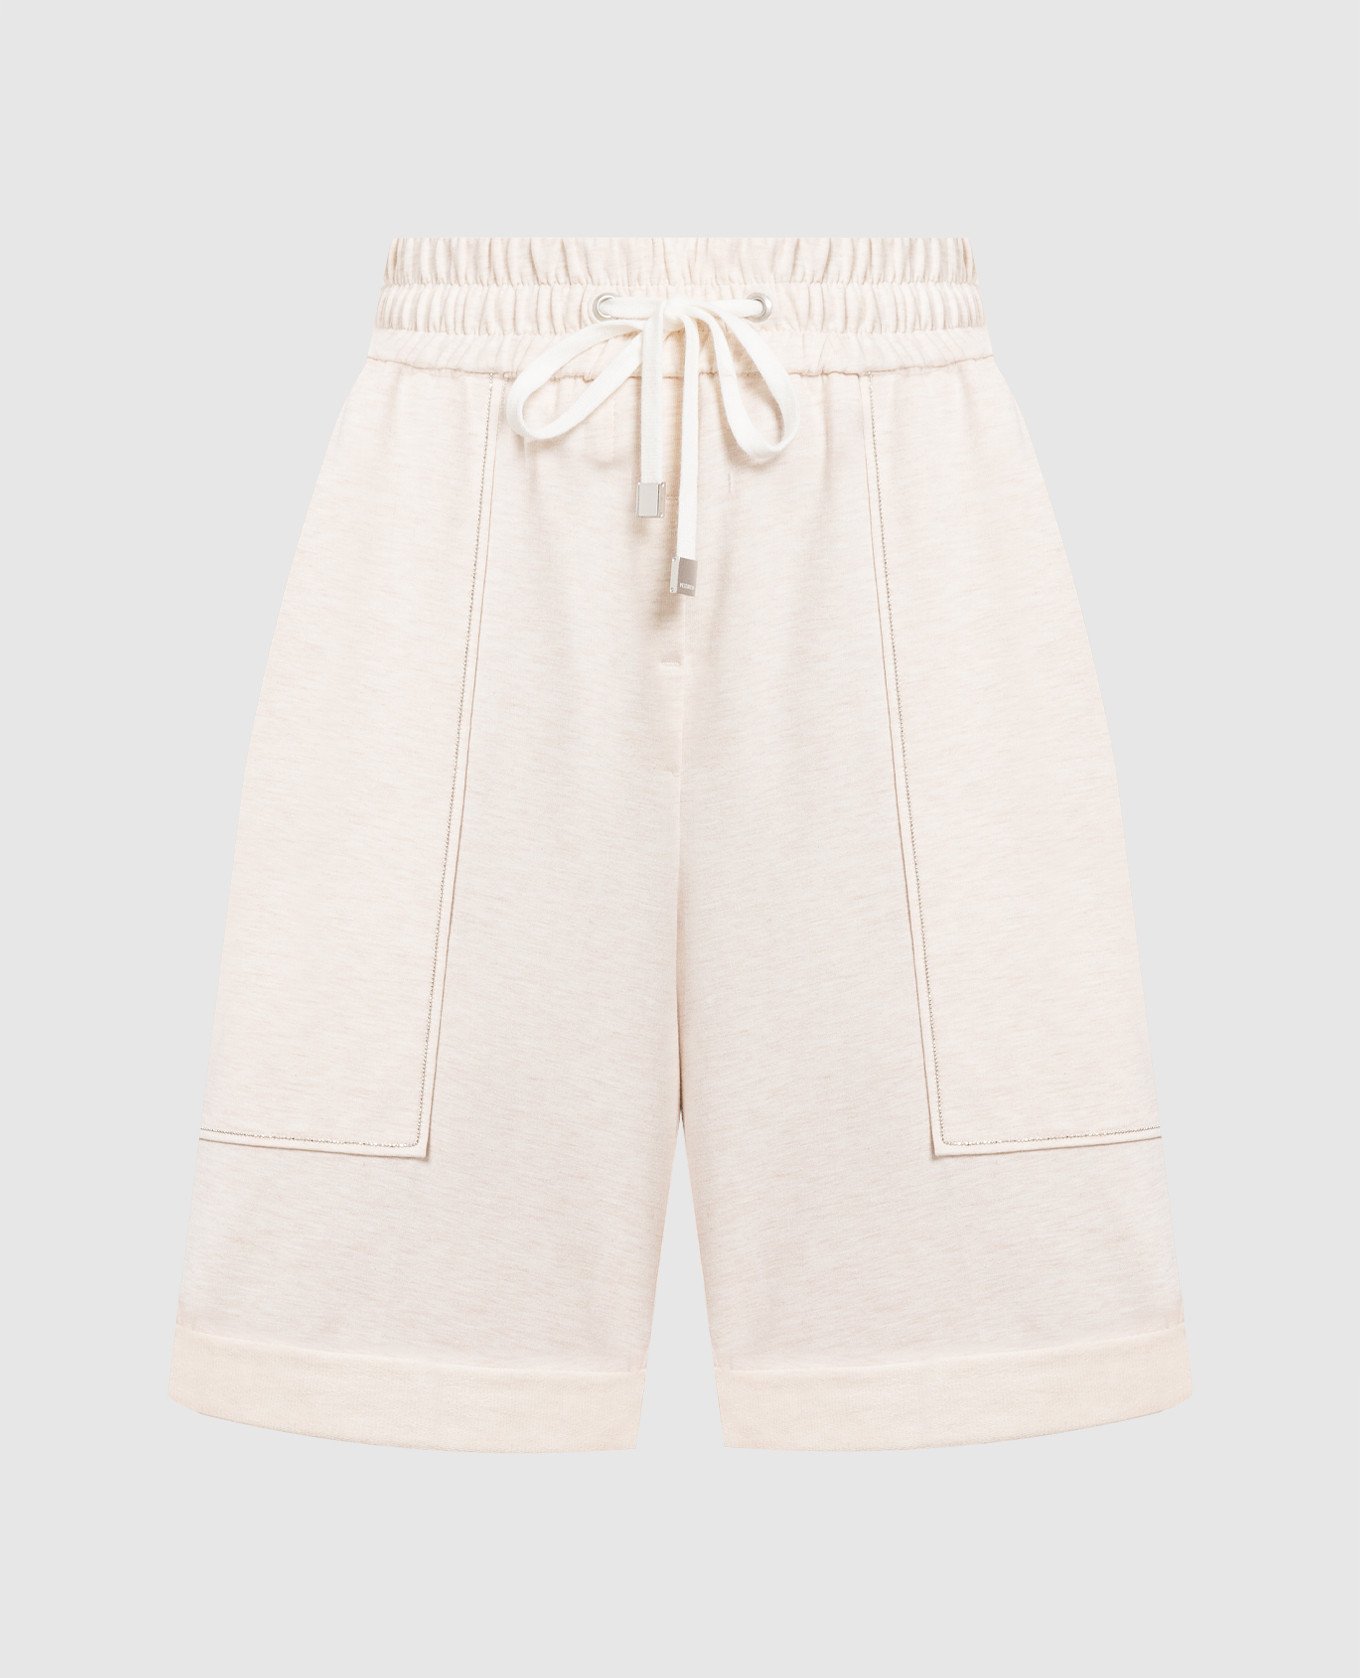 Beige shorts with monil chain